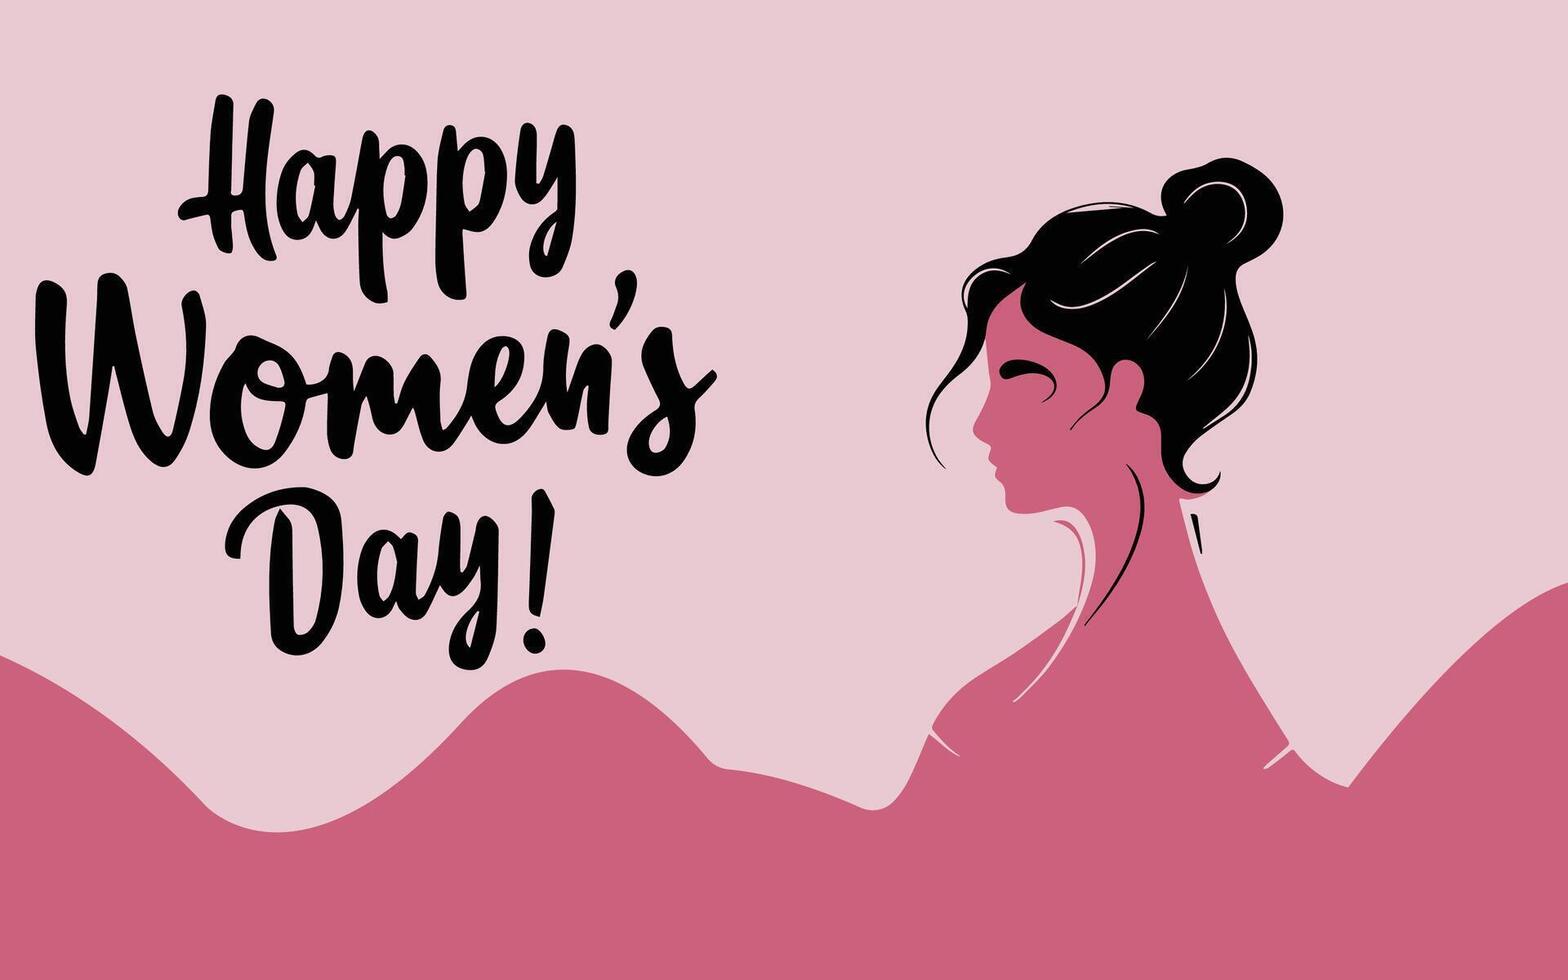 Happy Women Day greeting card illustration. Beautiful woman face with pink background. Modern minimalist style design for Women's day vector